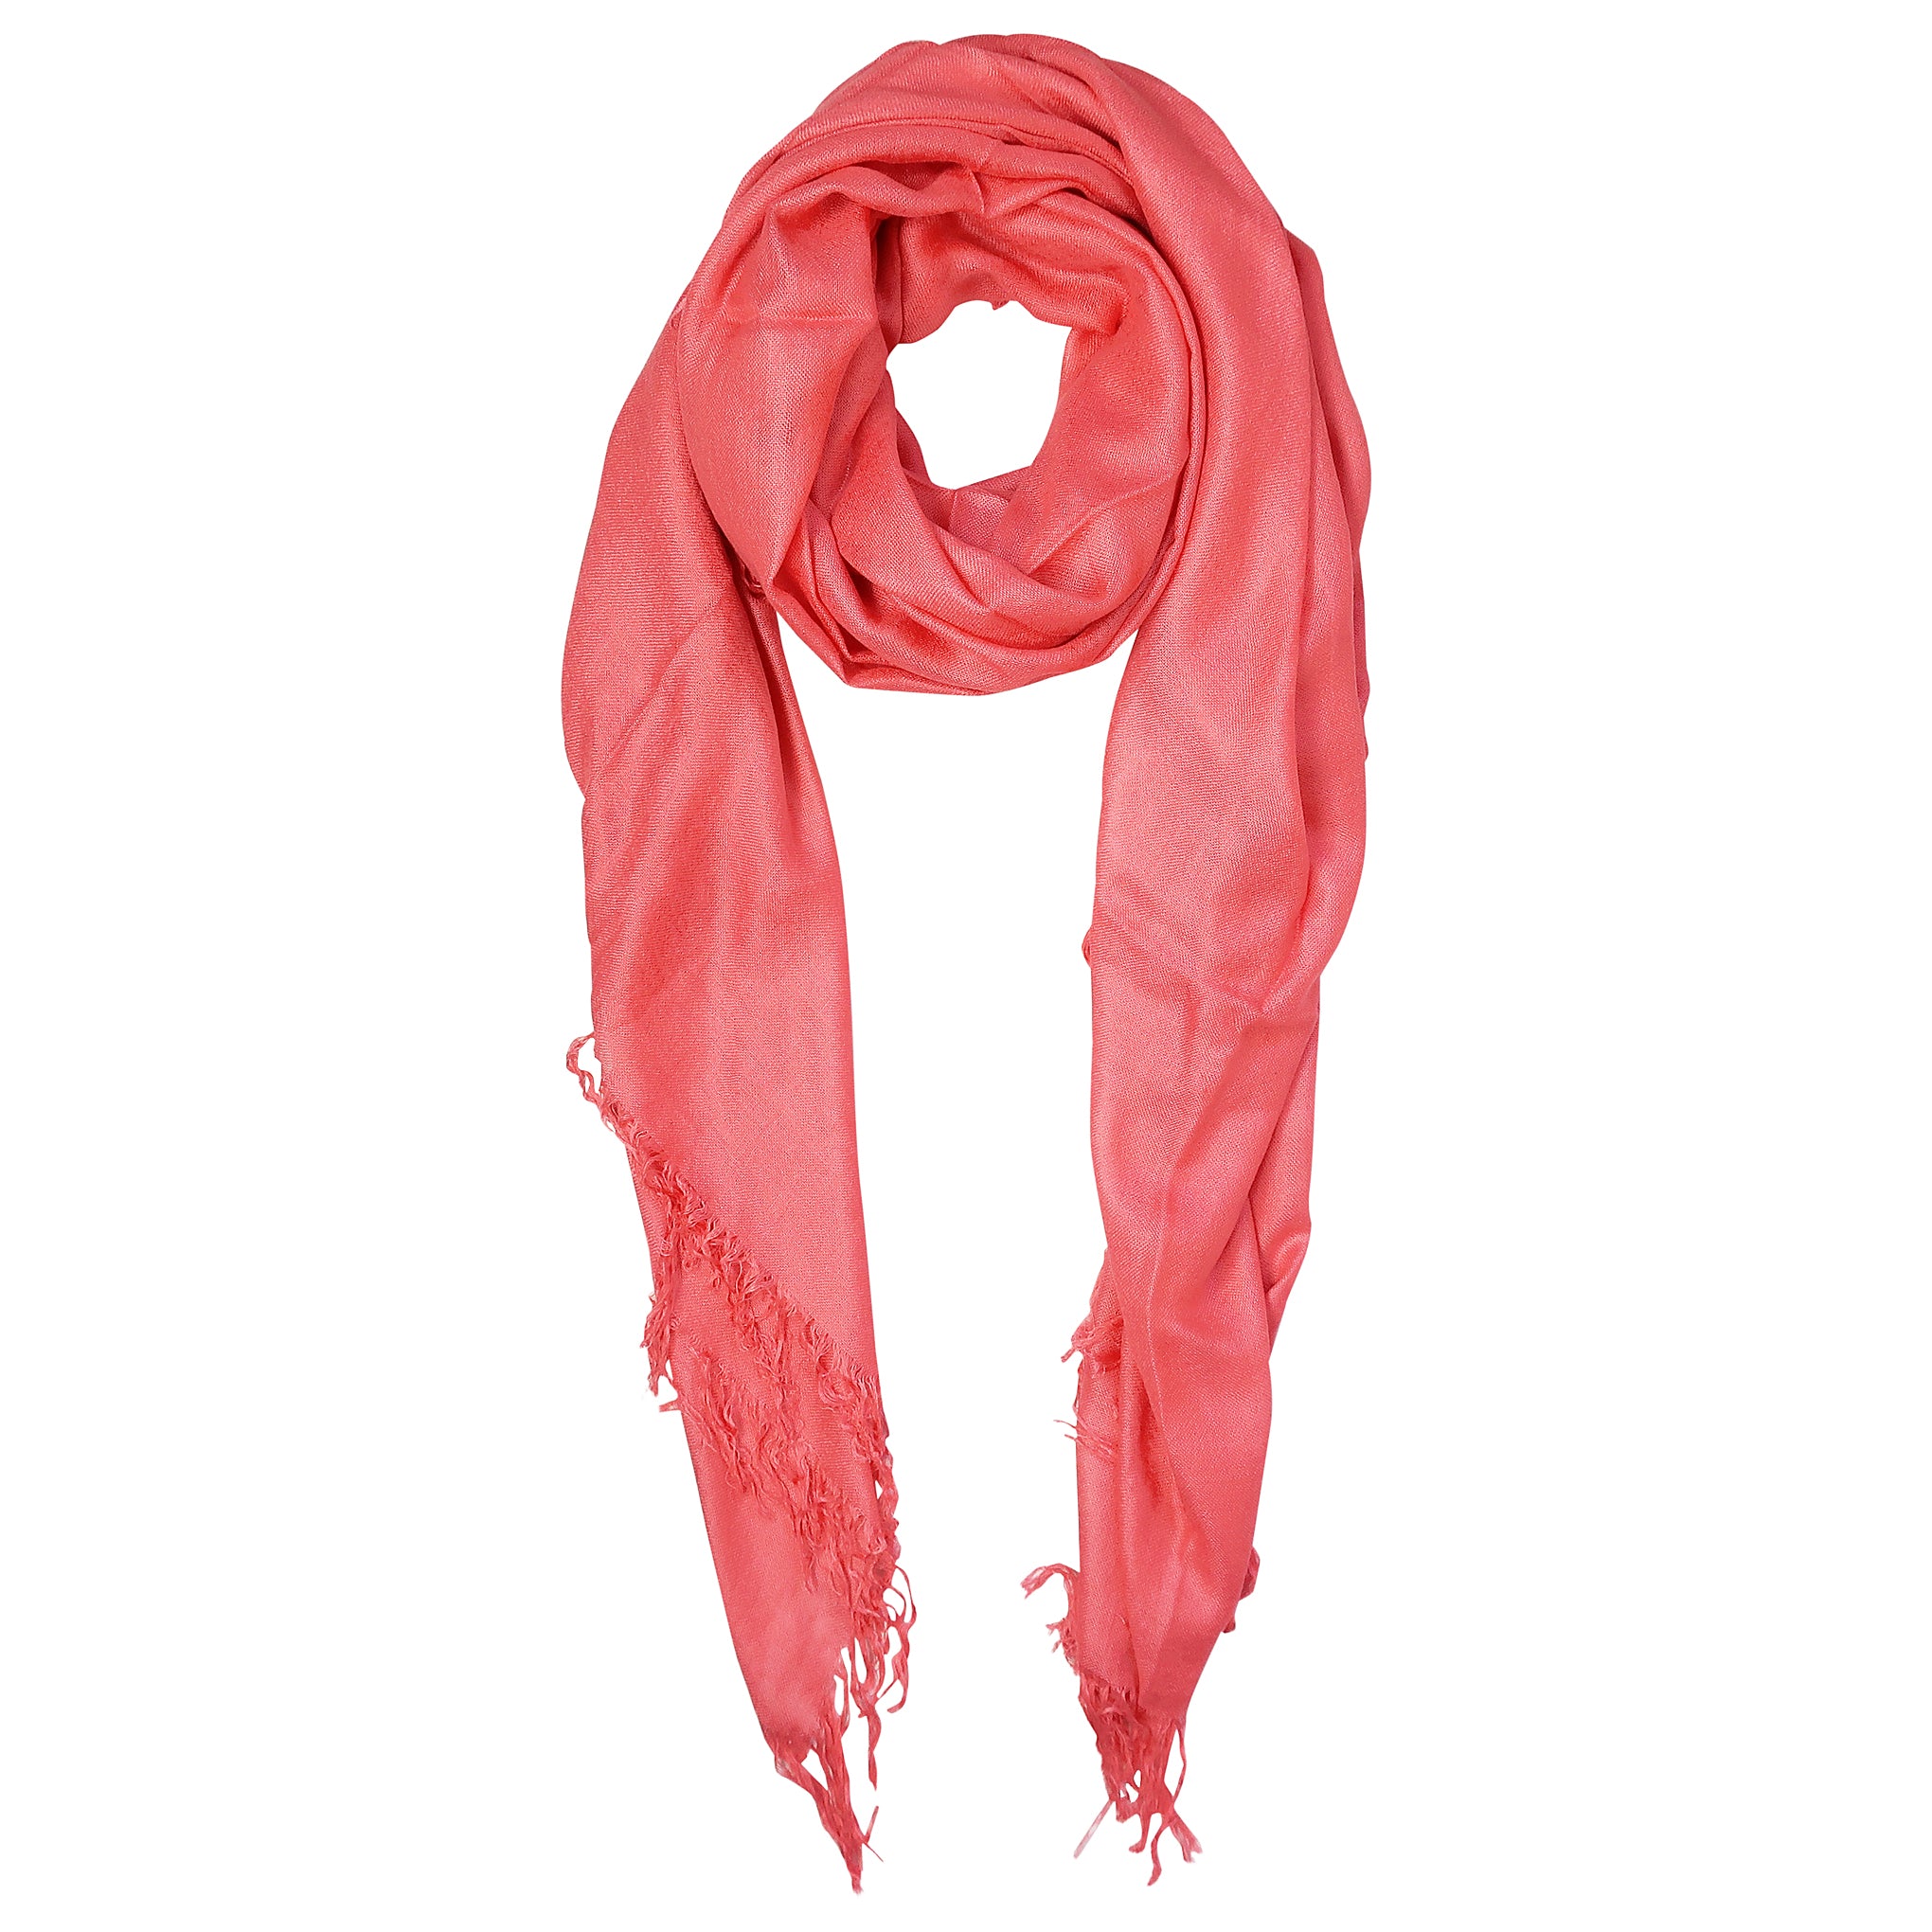 Blue Pacific Tissue Solid Modal and Cashmere Scarf Shawl in Tea Rose Pink